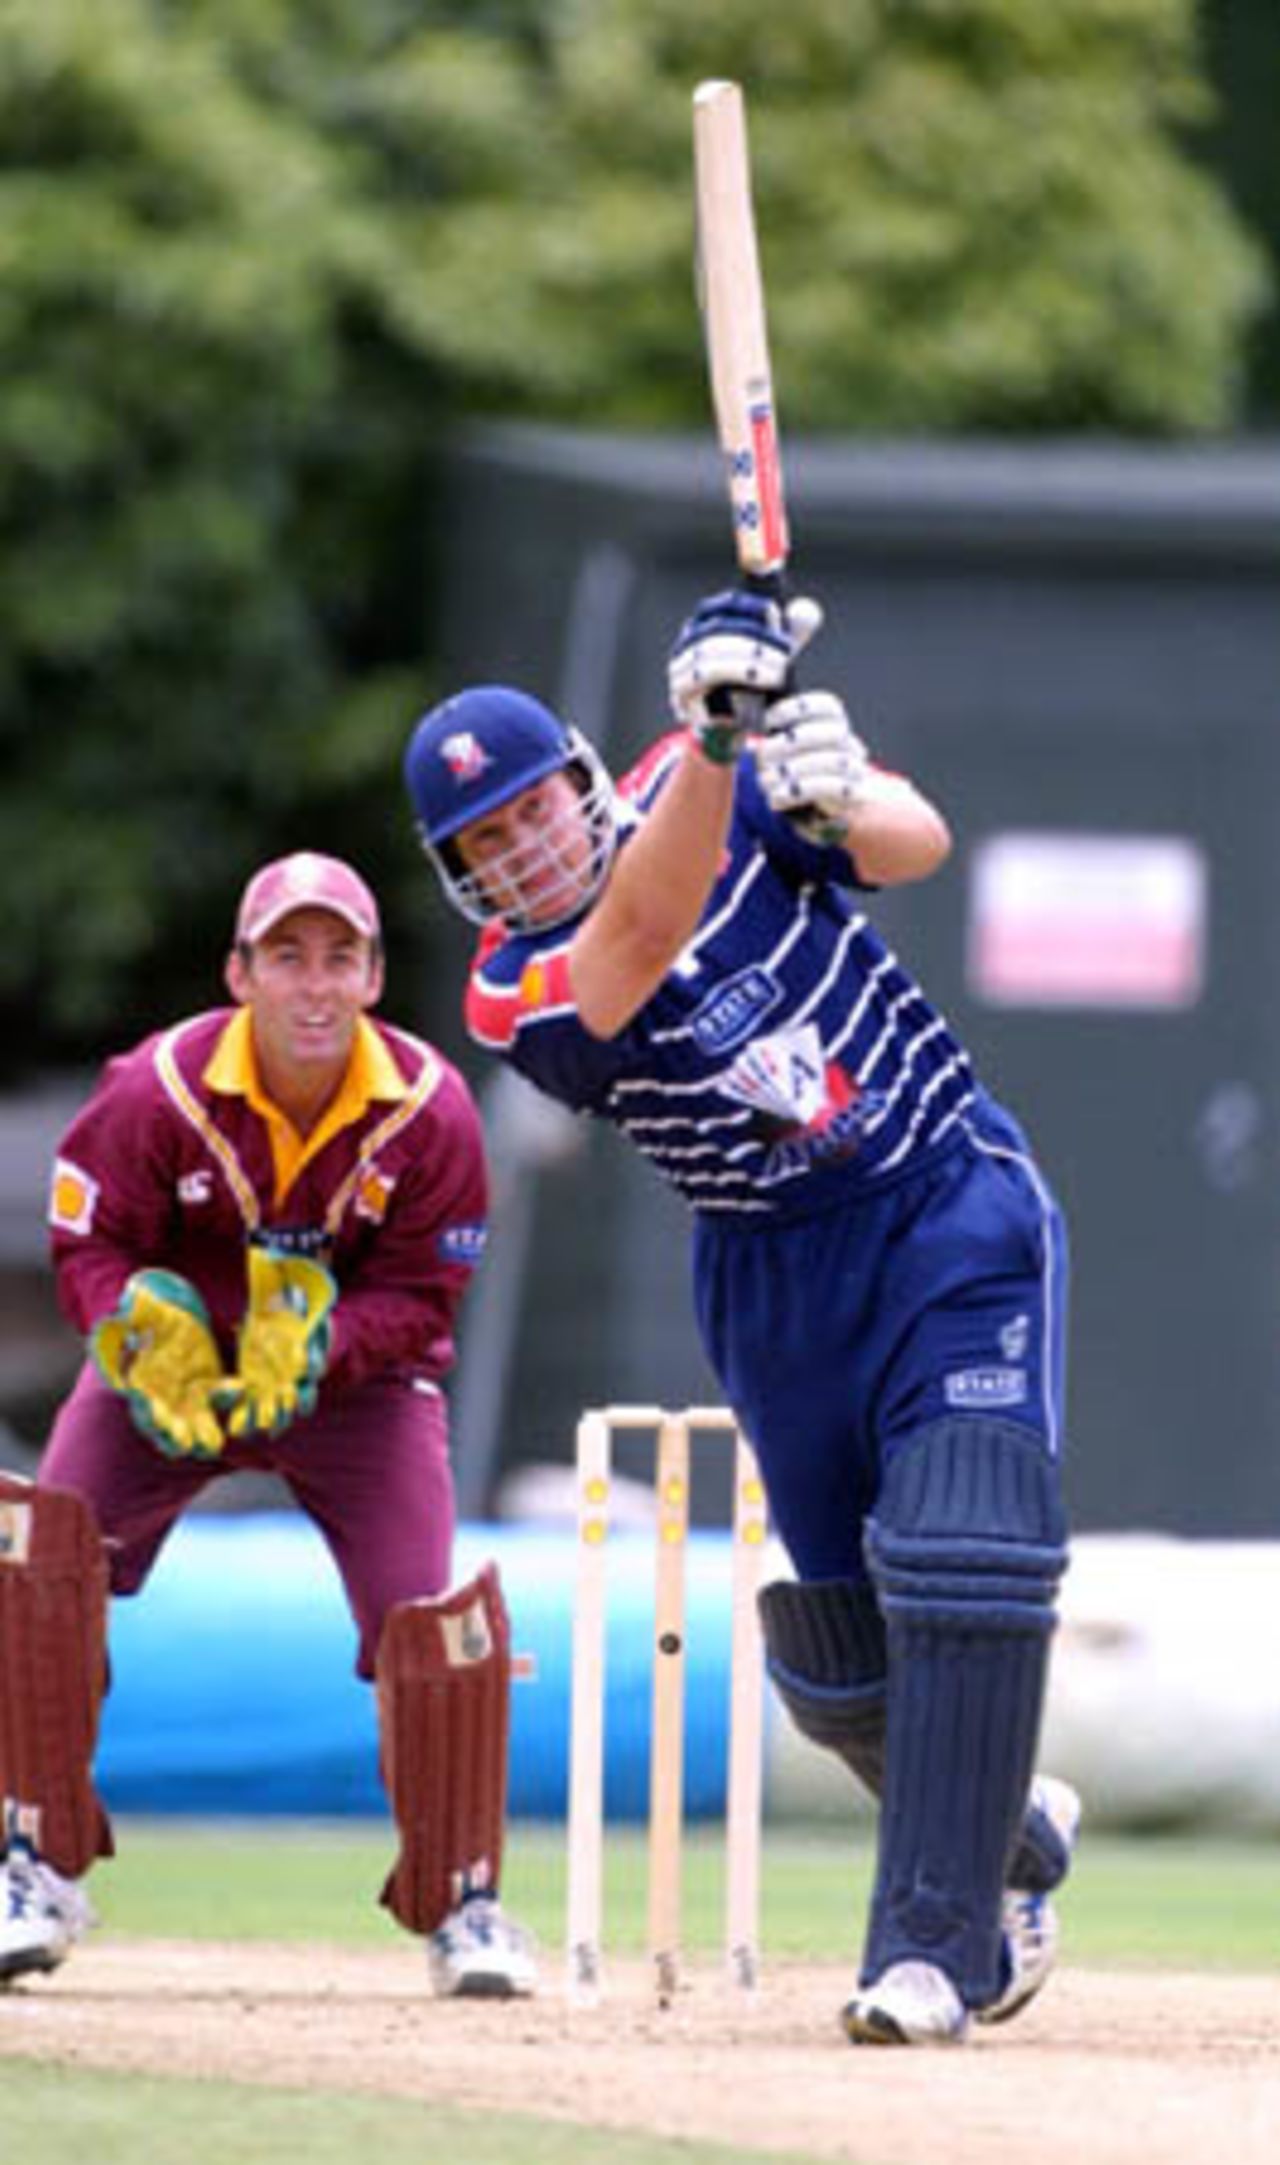 Auckland opening batsman Llorne Howell lofts a ball down the ground during his innings of 67 as Northern Districts wicket-keeper Robbie Hart looks on, Shell Cup: Auckland v Northern Districts at Eden Park Outer Oval, Auckland, 18 January 2001